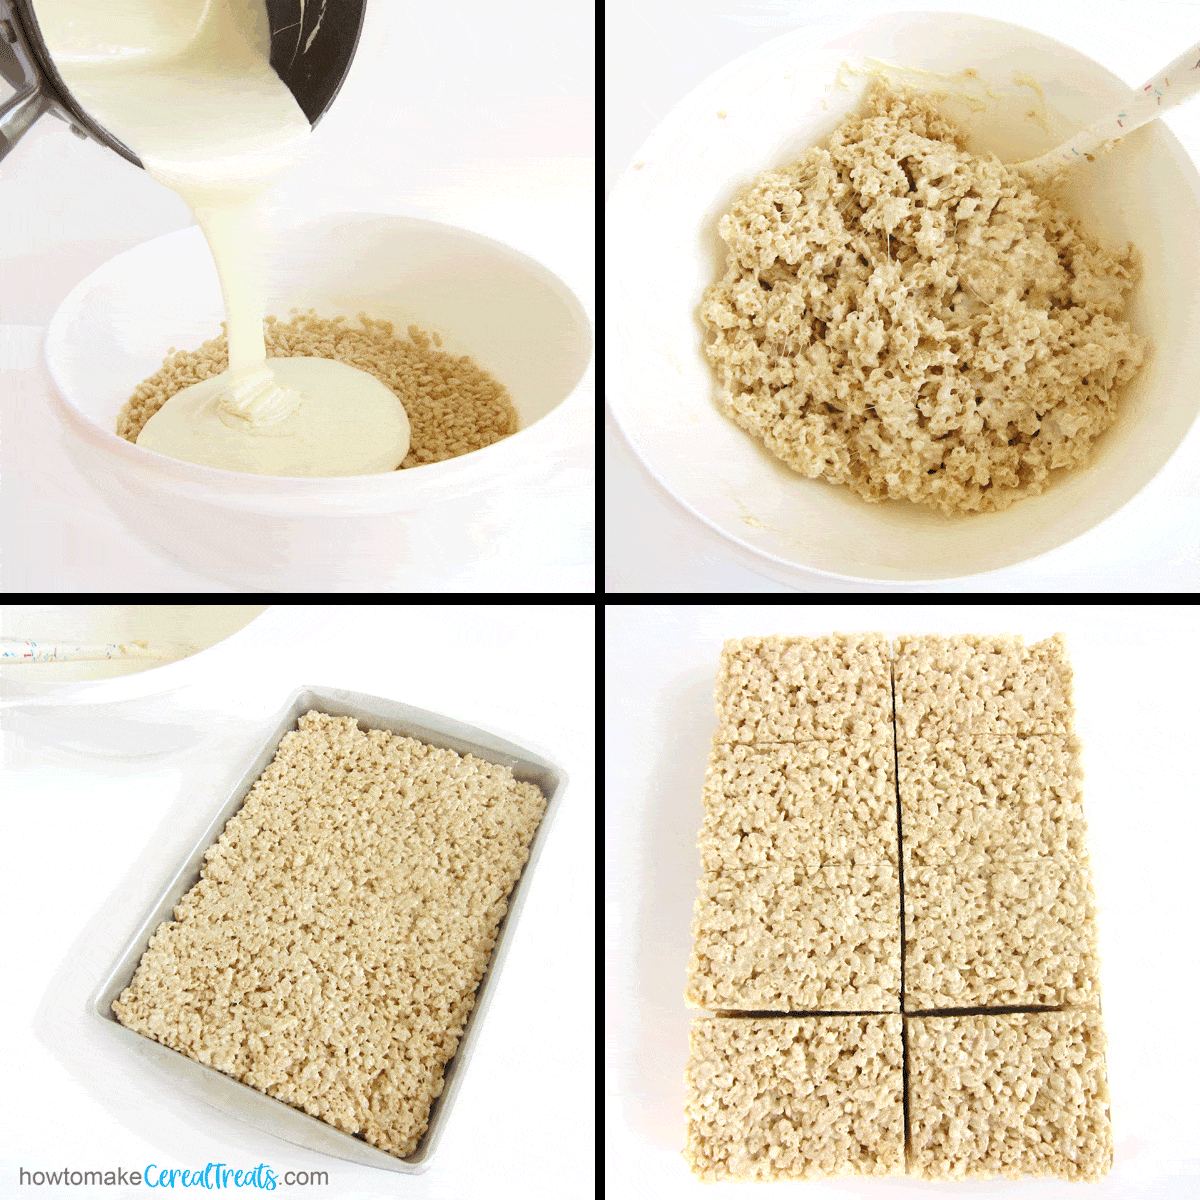 stir together melted butter and marshmallows with Rice Krispies cereal to make jumbo Rice Krispie Treats